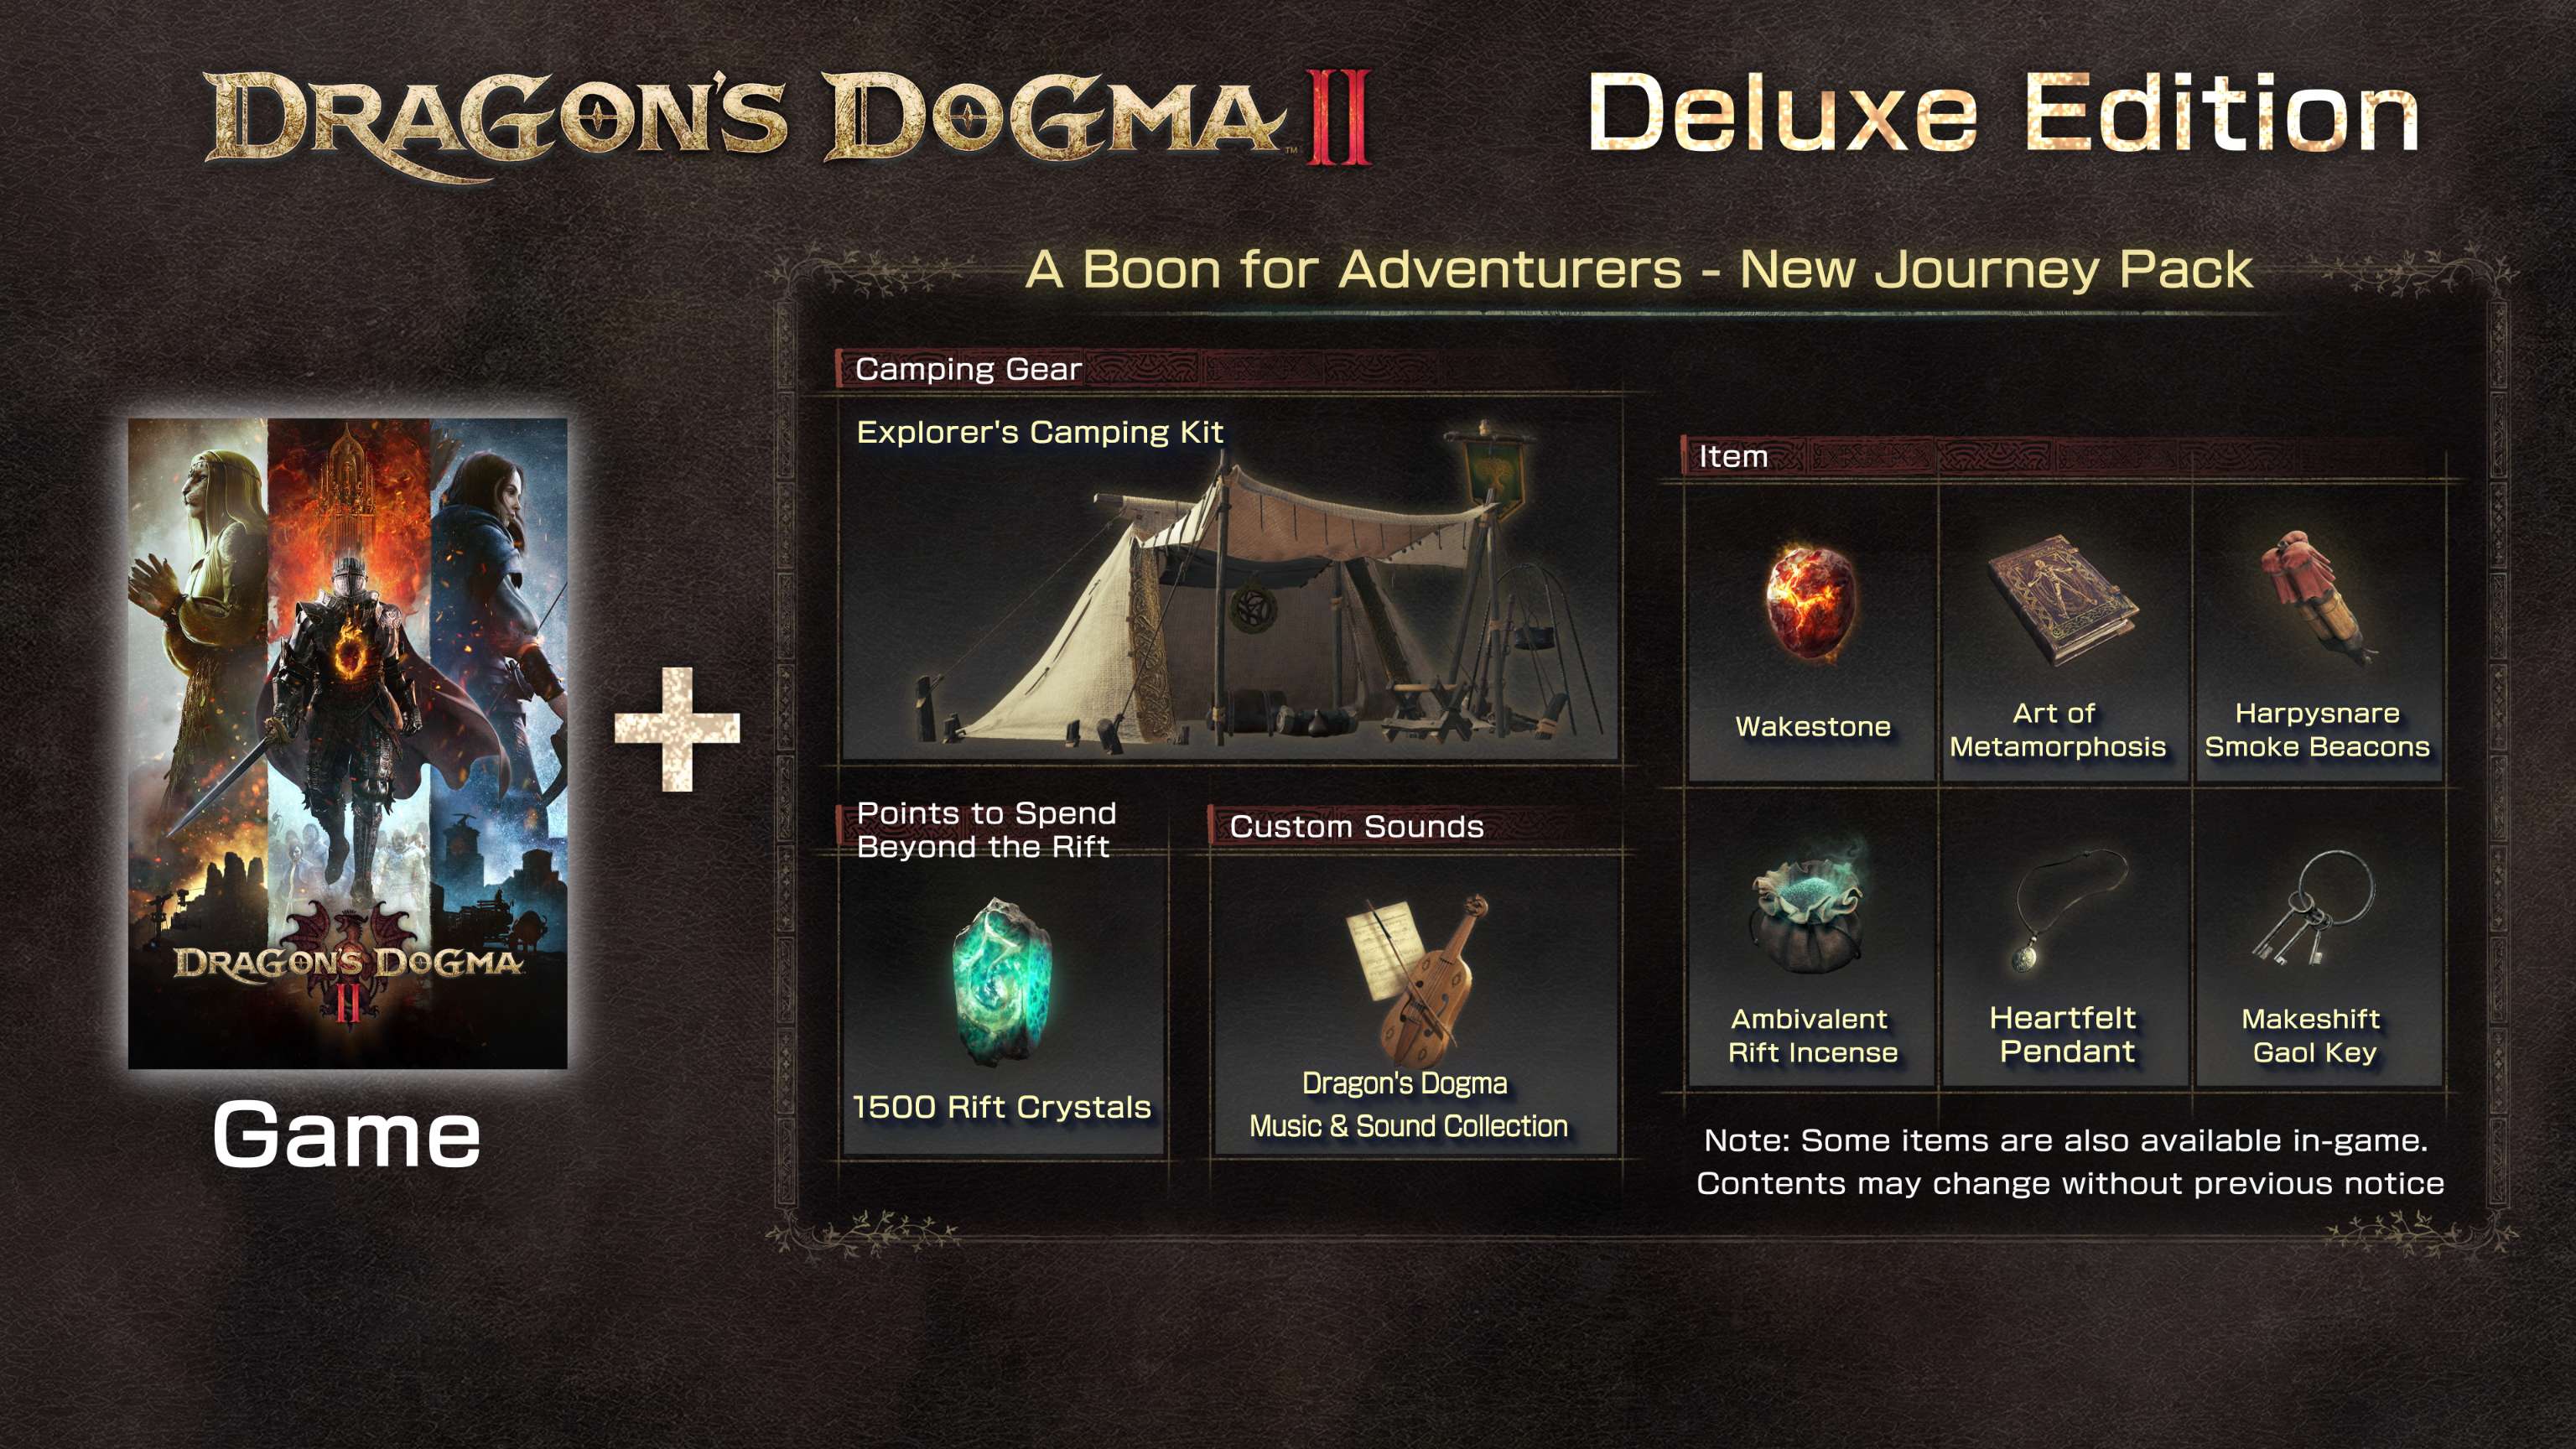 Dragon's Dogma on X: "Pre-order Dragon's Dogma 2 now! The Deluxe Edition  includes the main game and the DLC "A Boon for Adventures - New Journey  Pack" which features a special camping